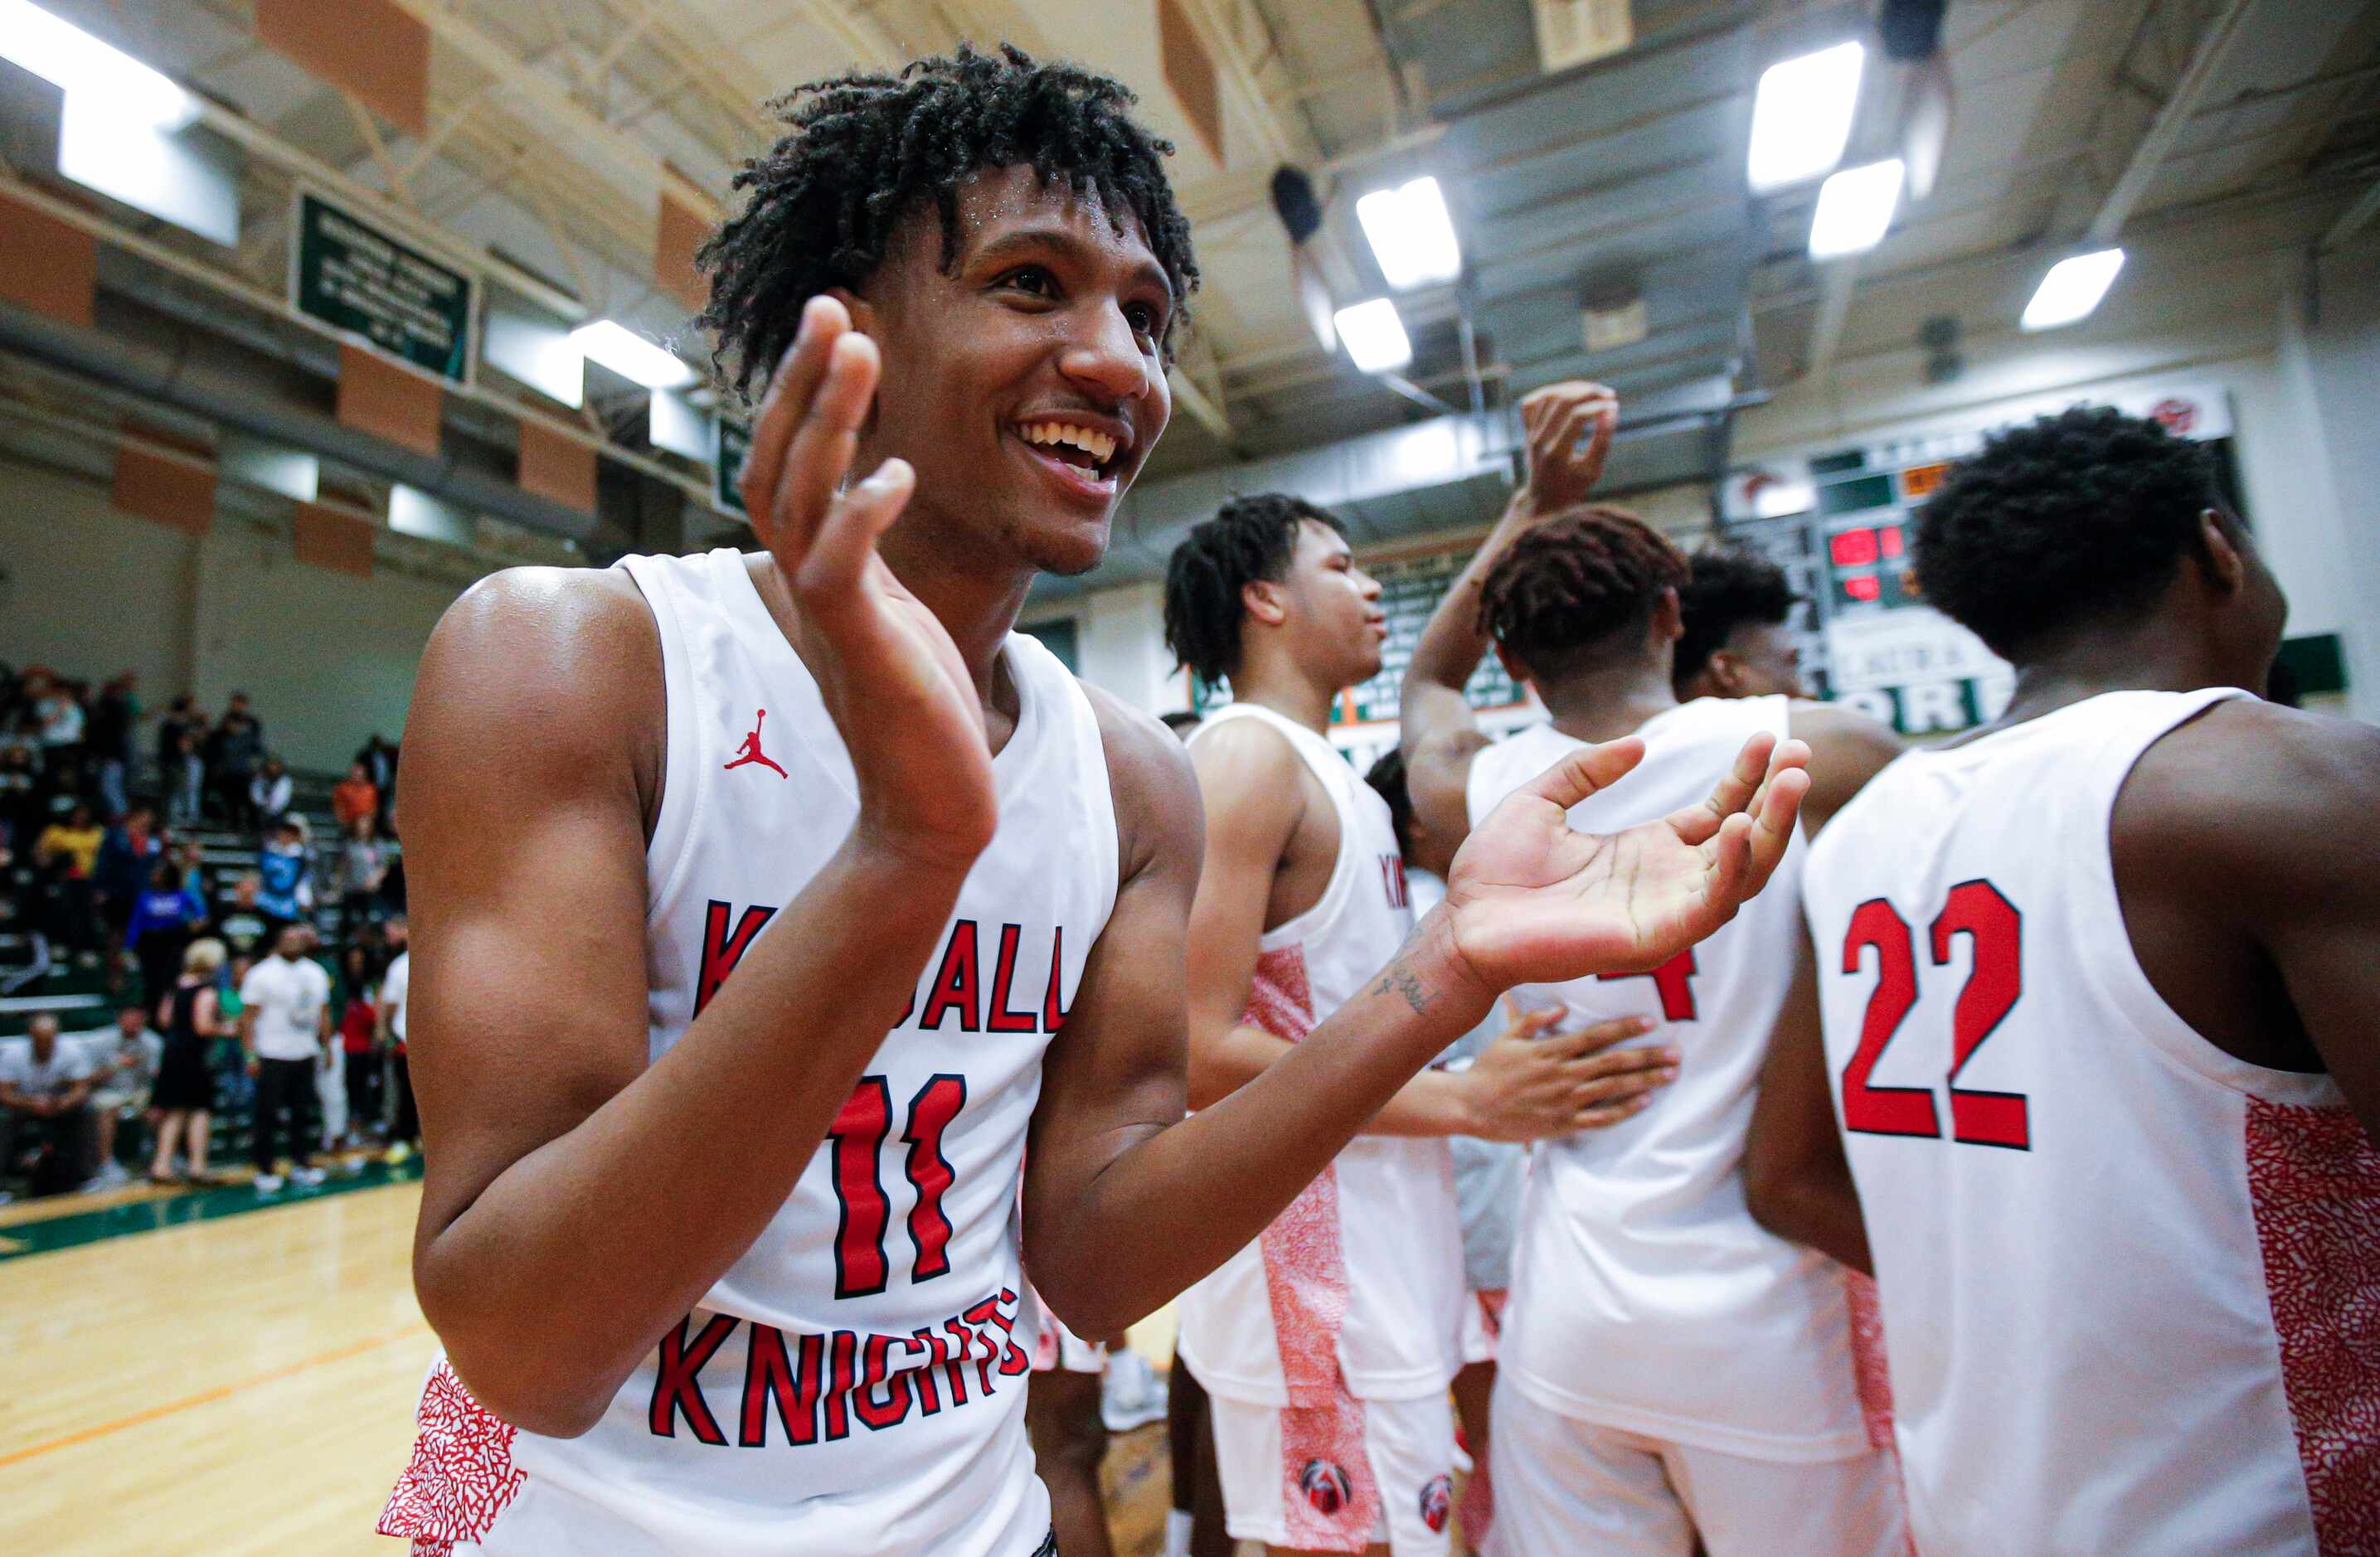 Kimball senior Cory Reynolds celebrates a 101-73 win over Newman Smith after a Class 5A...